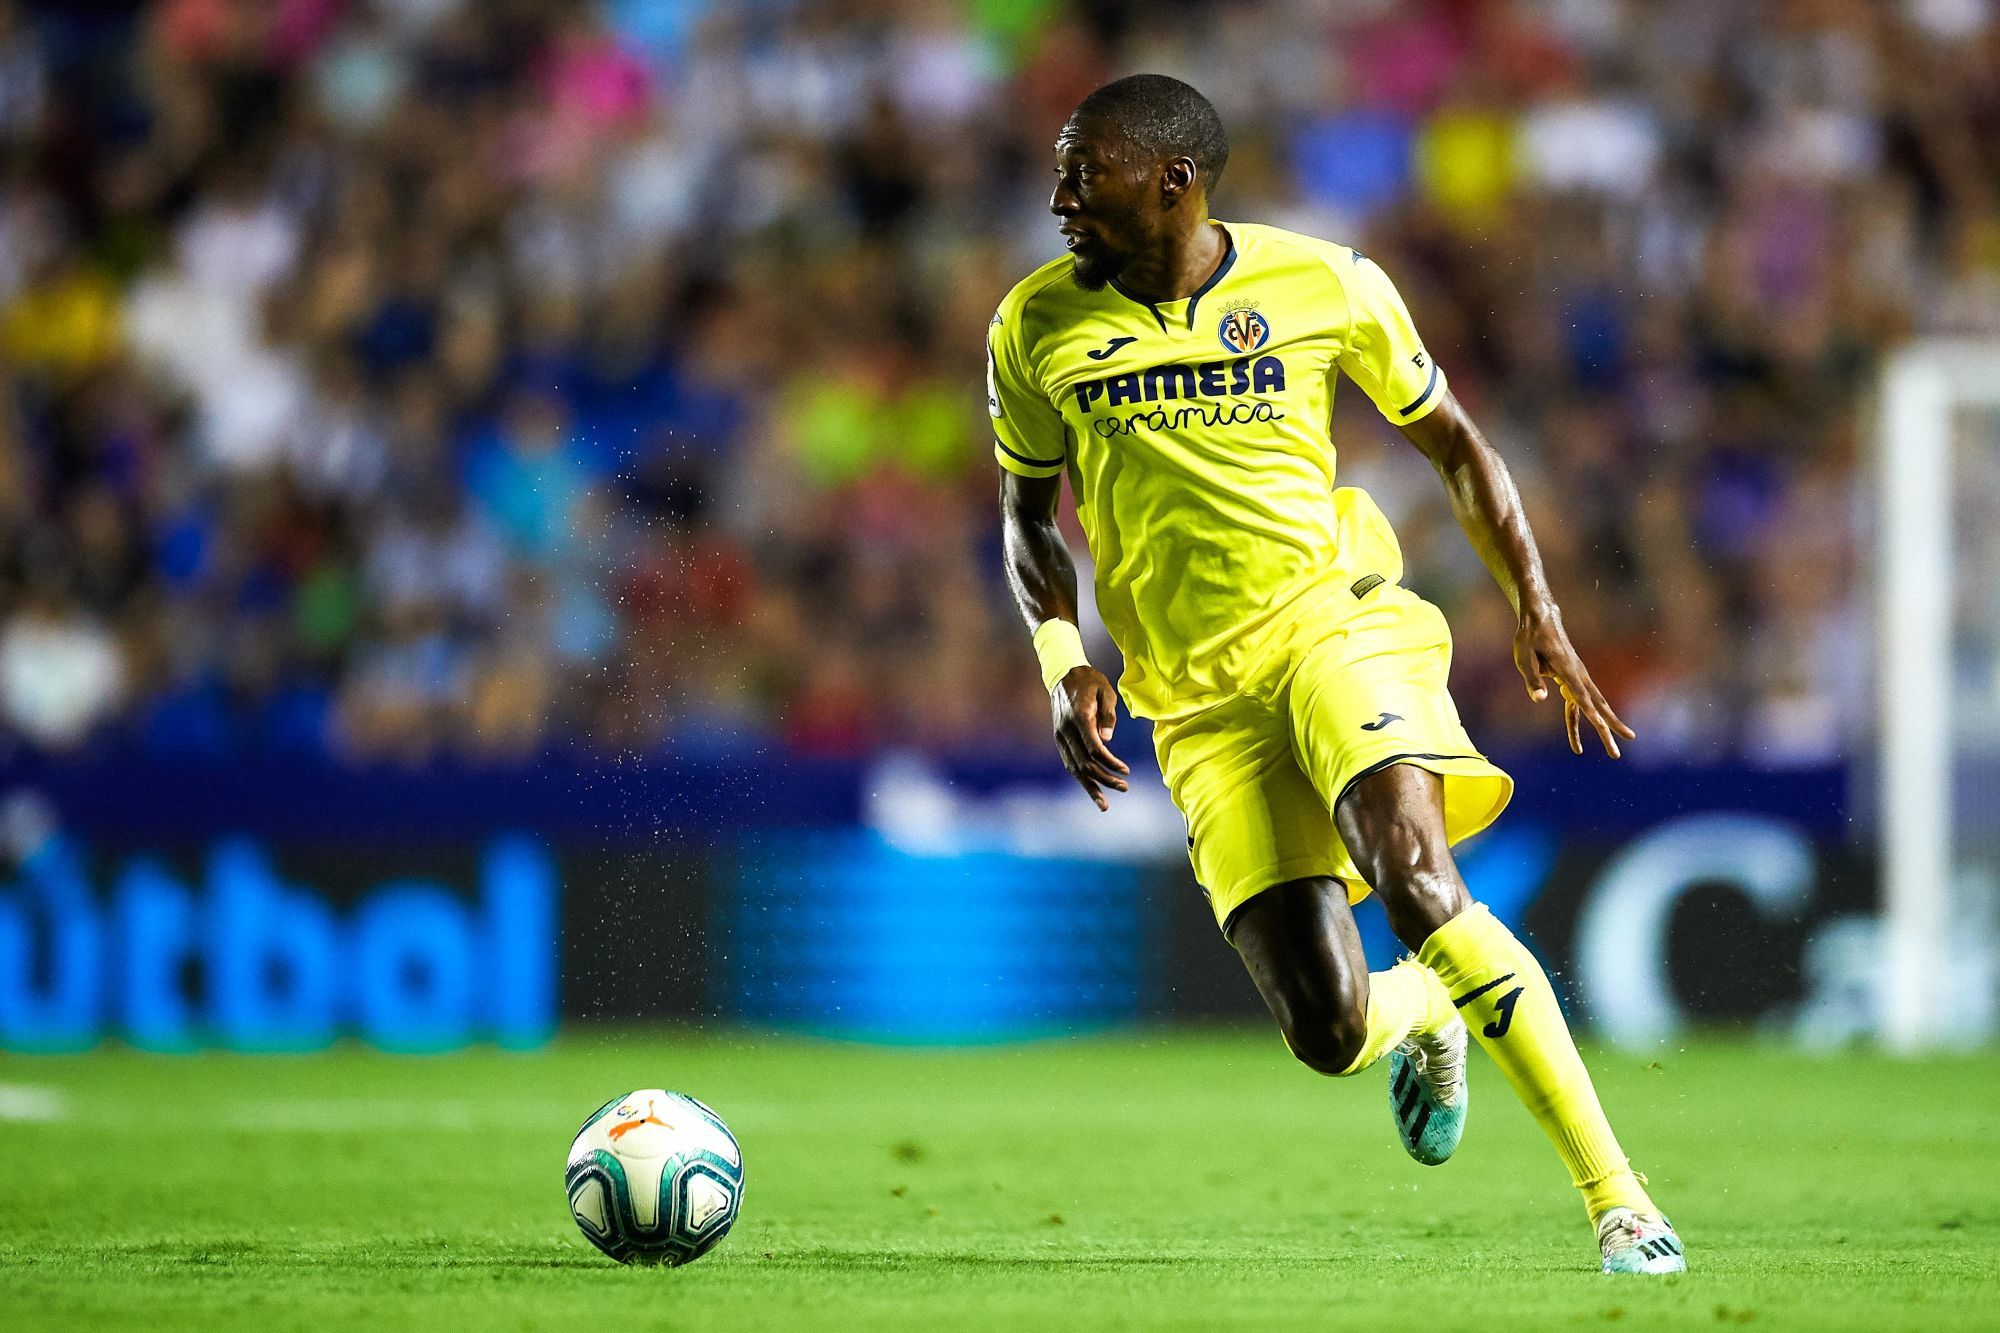 Carl Toko Ekambi of Villarreal in action during the Liga match between Levante UD and Villarreal CF at Ciutat de Valencia on August 23, 2019 in Valencia, Spain.
Photo : SUSA / Icon Sport